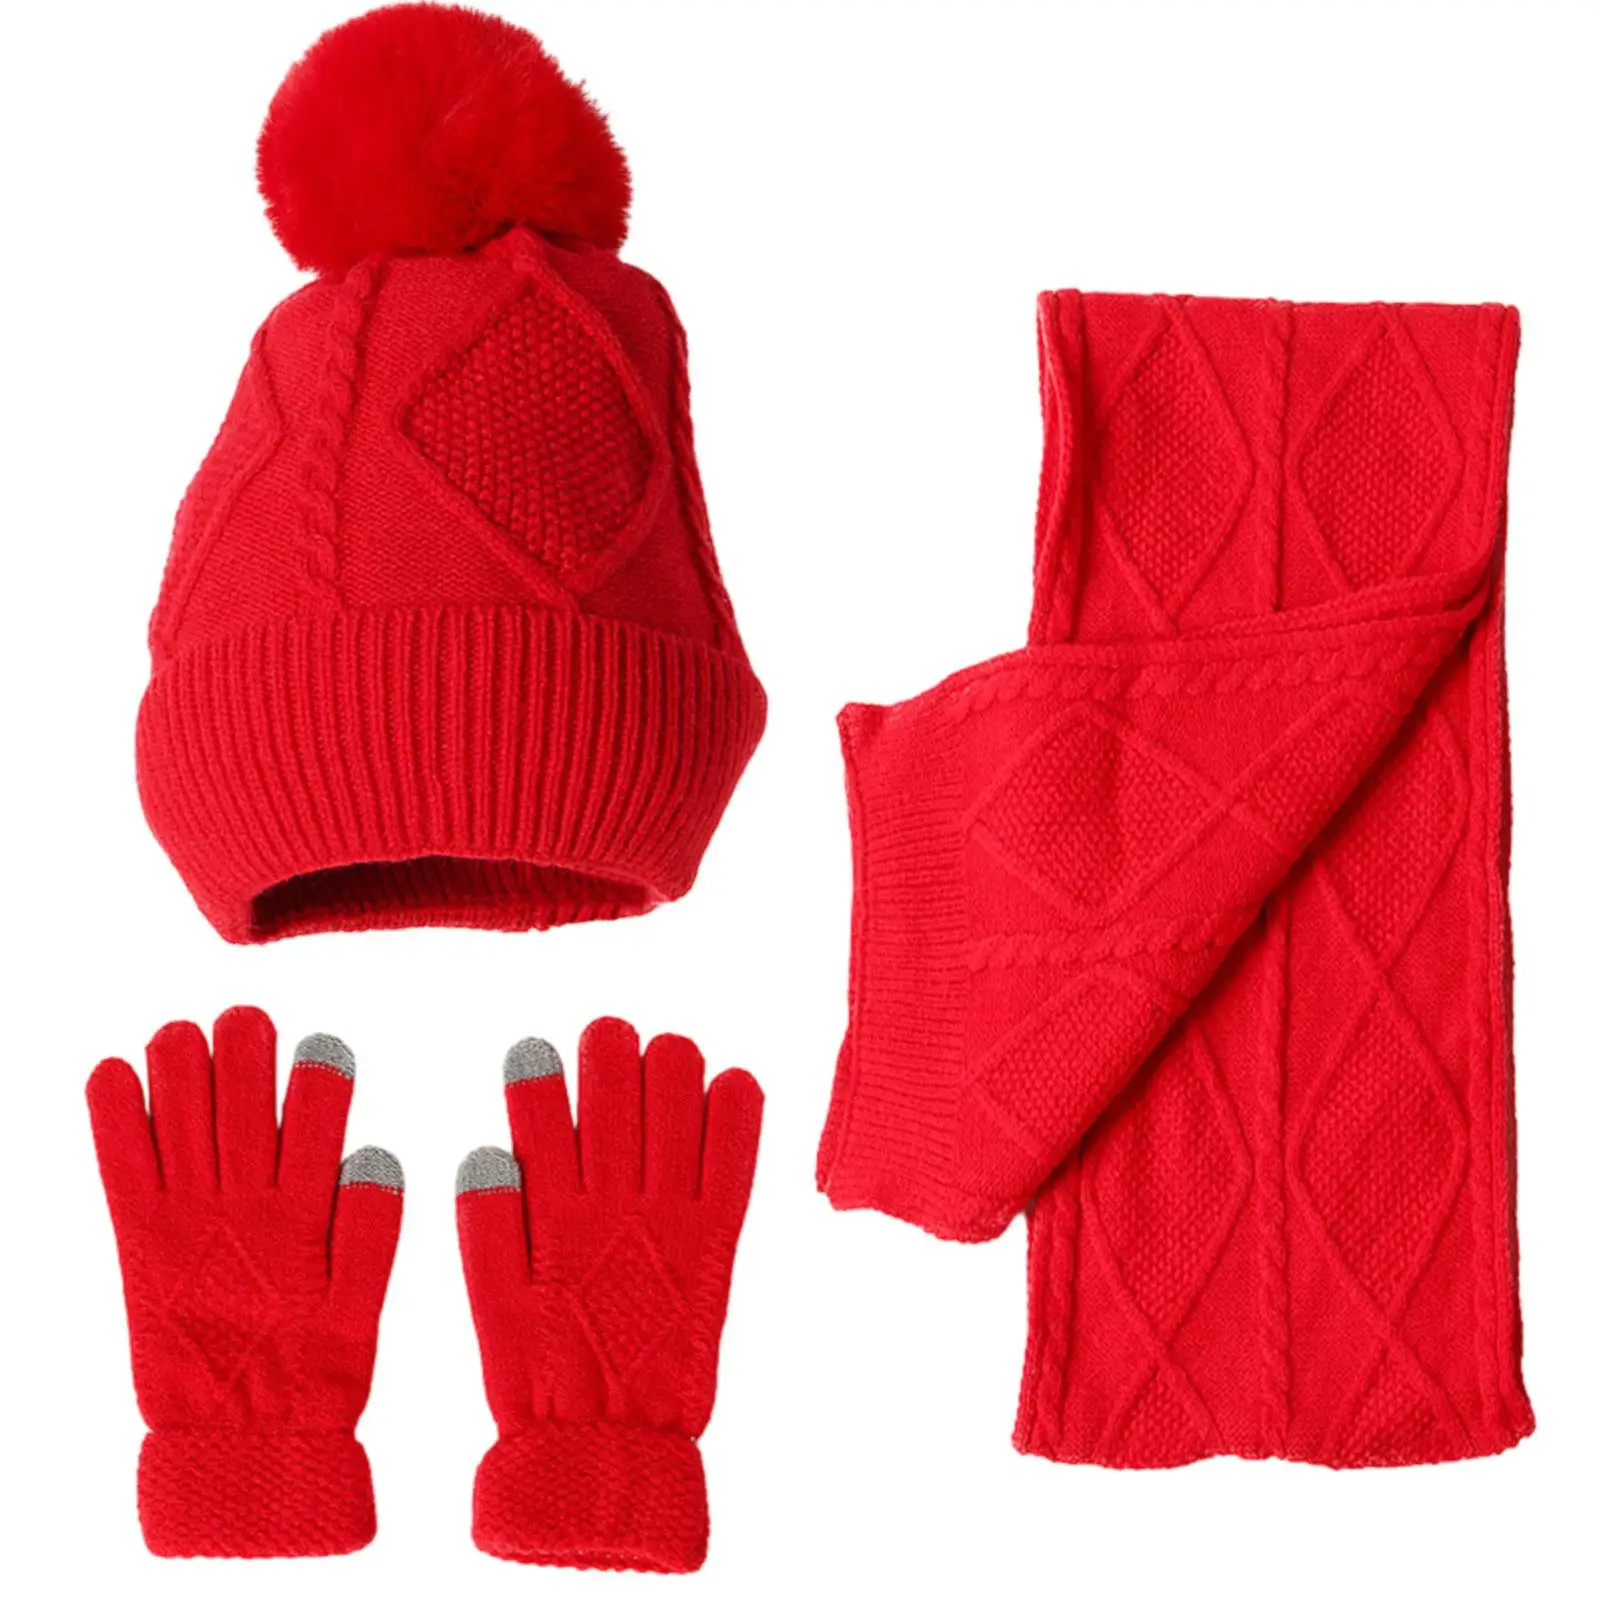 Winter Hat Scarf Gloves Winter Cold Cap for Cold Weather Adults Cap Beanie for Outdoor Sports Skiing Hiking Fishing Holiday